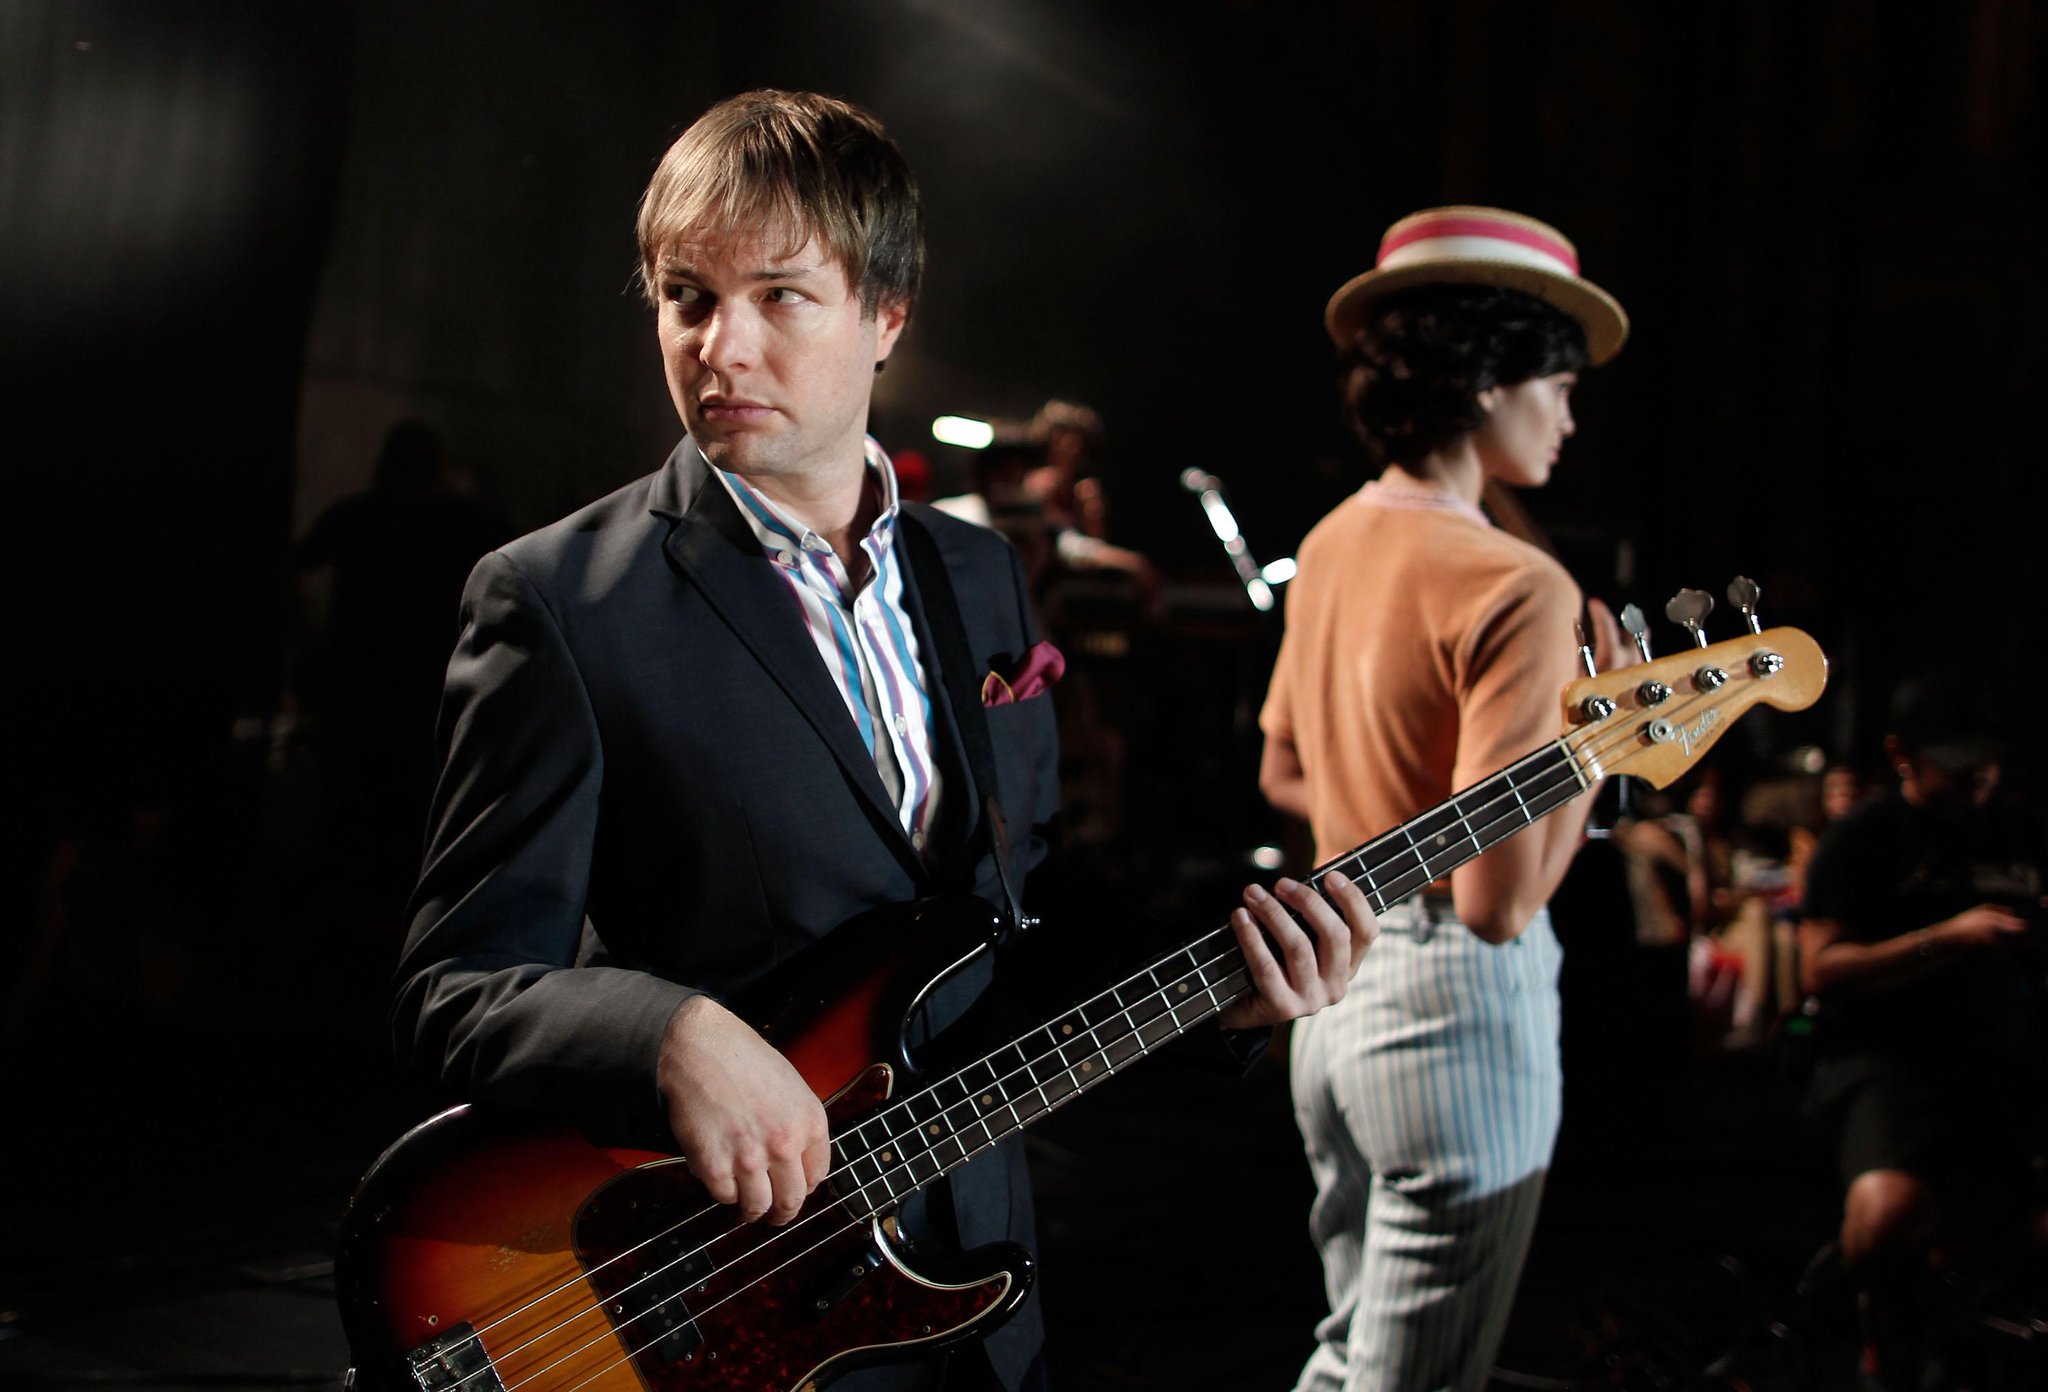 Happy birthday shout out to \s Mickey Madden! 